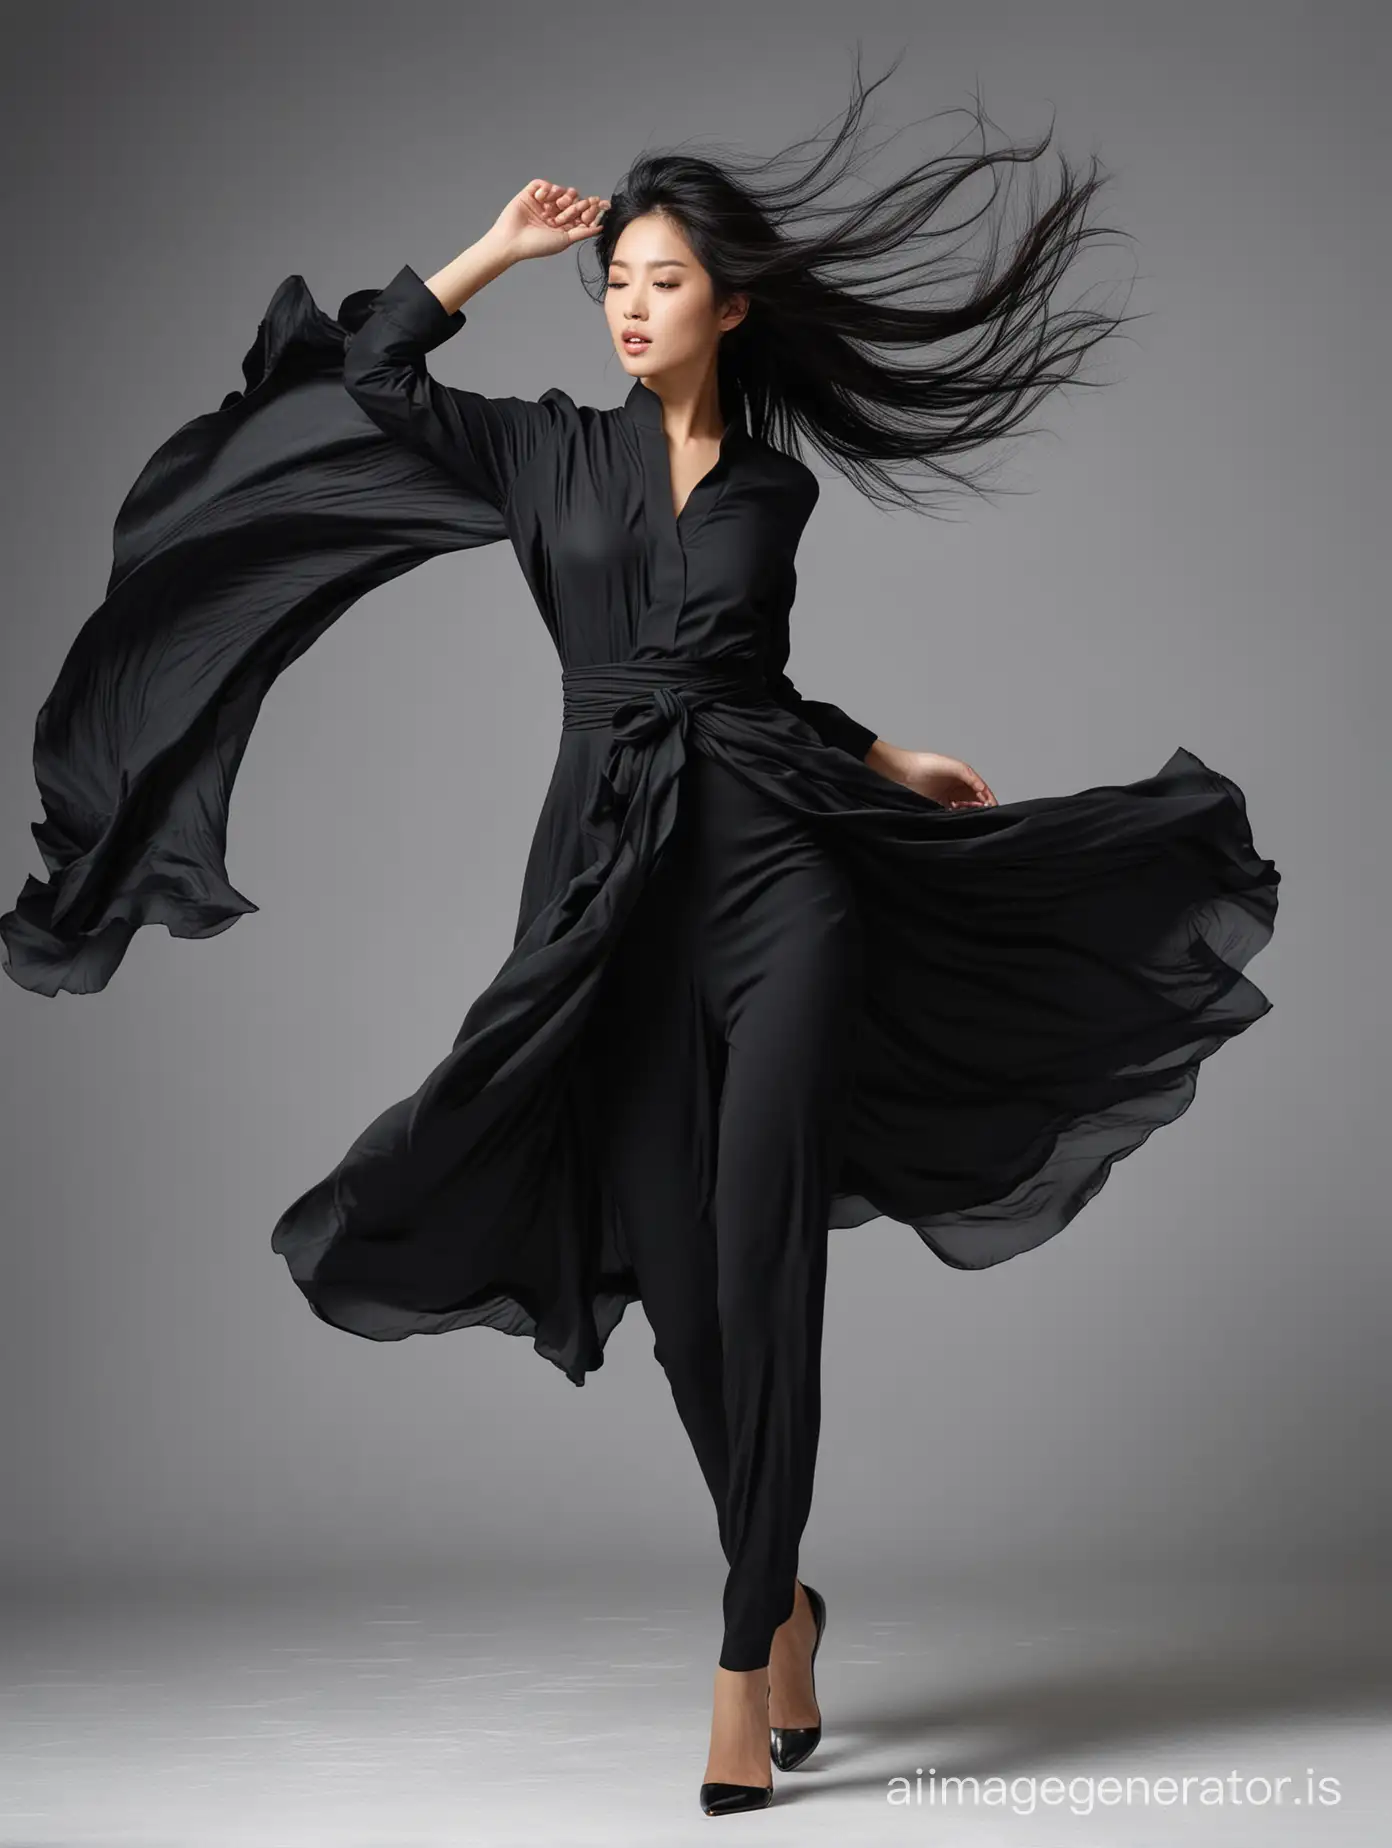 aura epitome of perfection oriental woman wind blowing hair black clothes head to toe